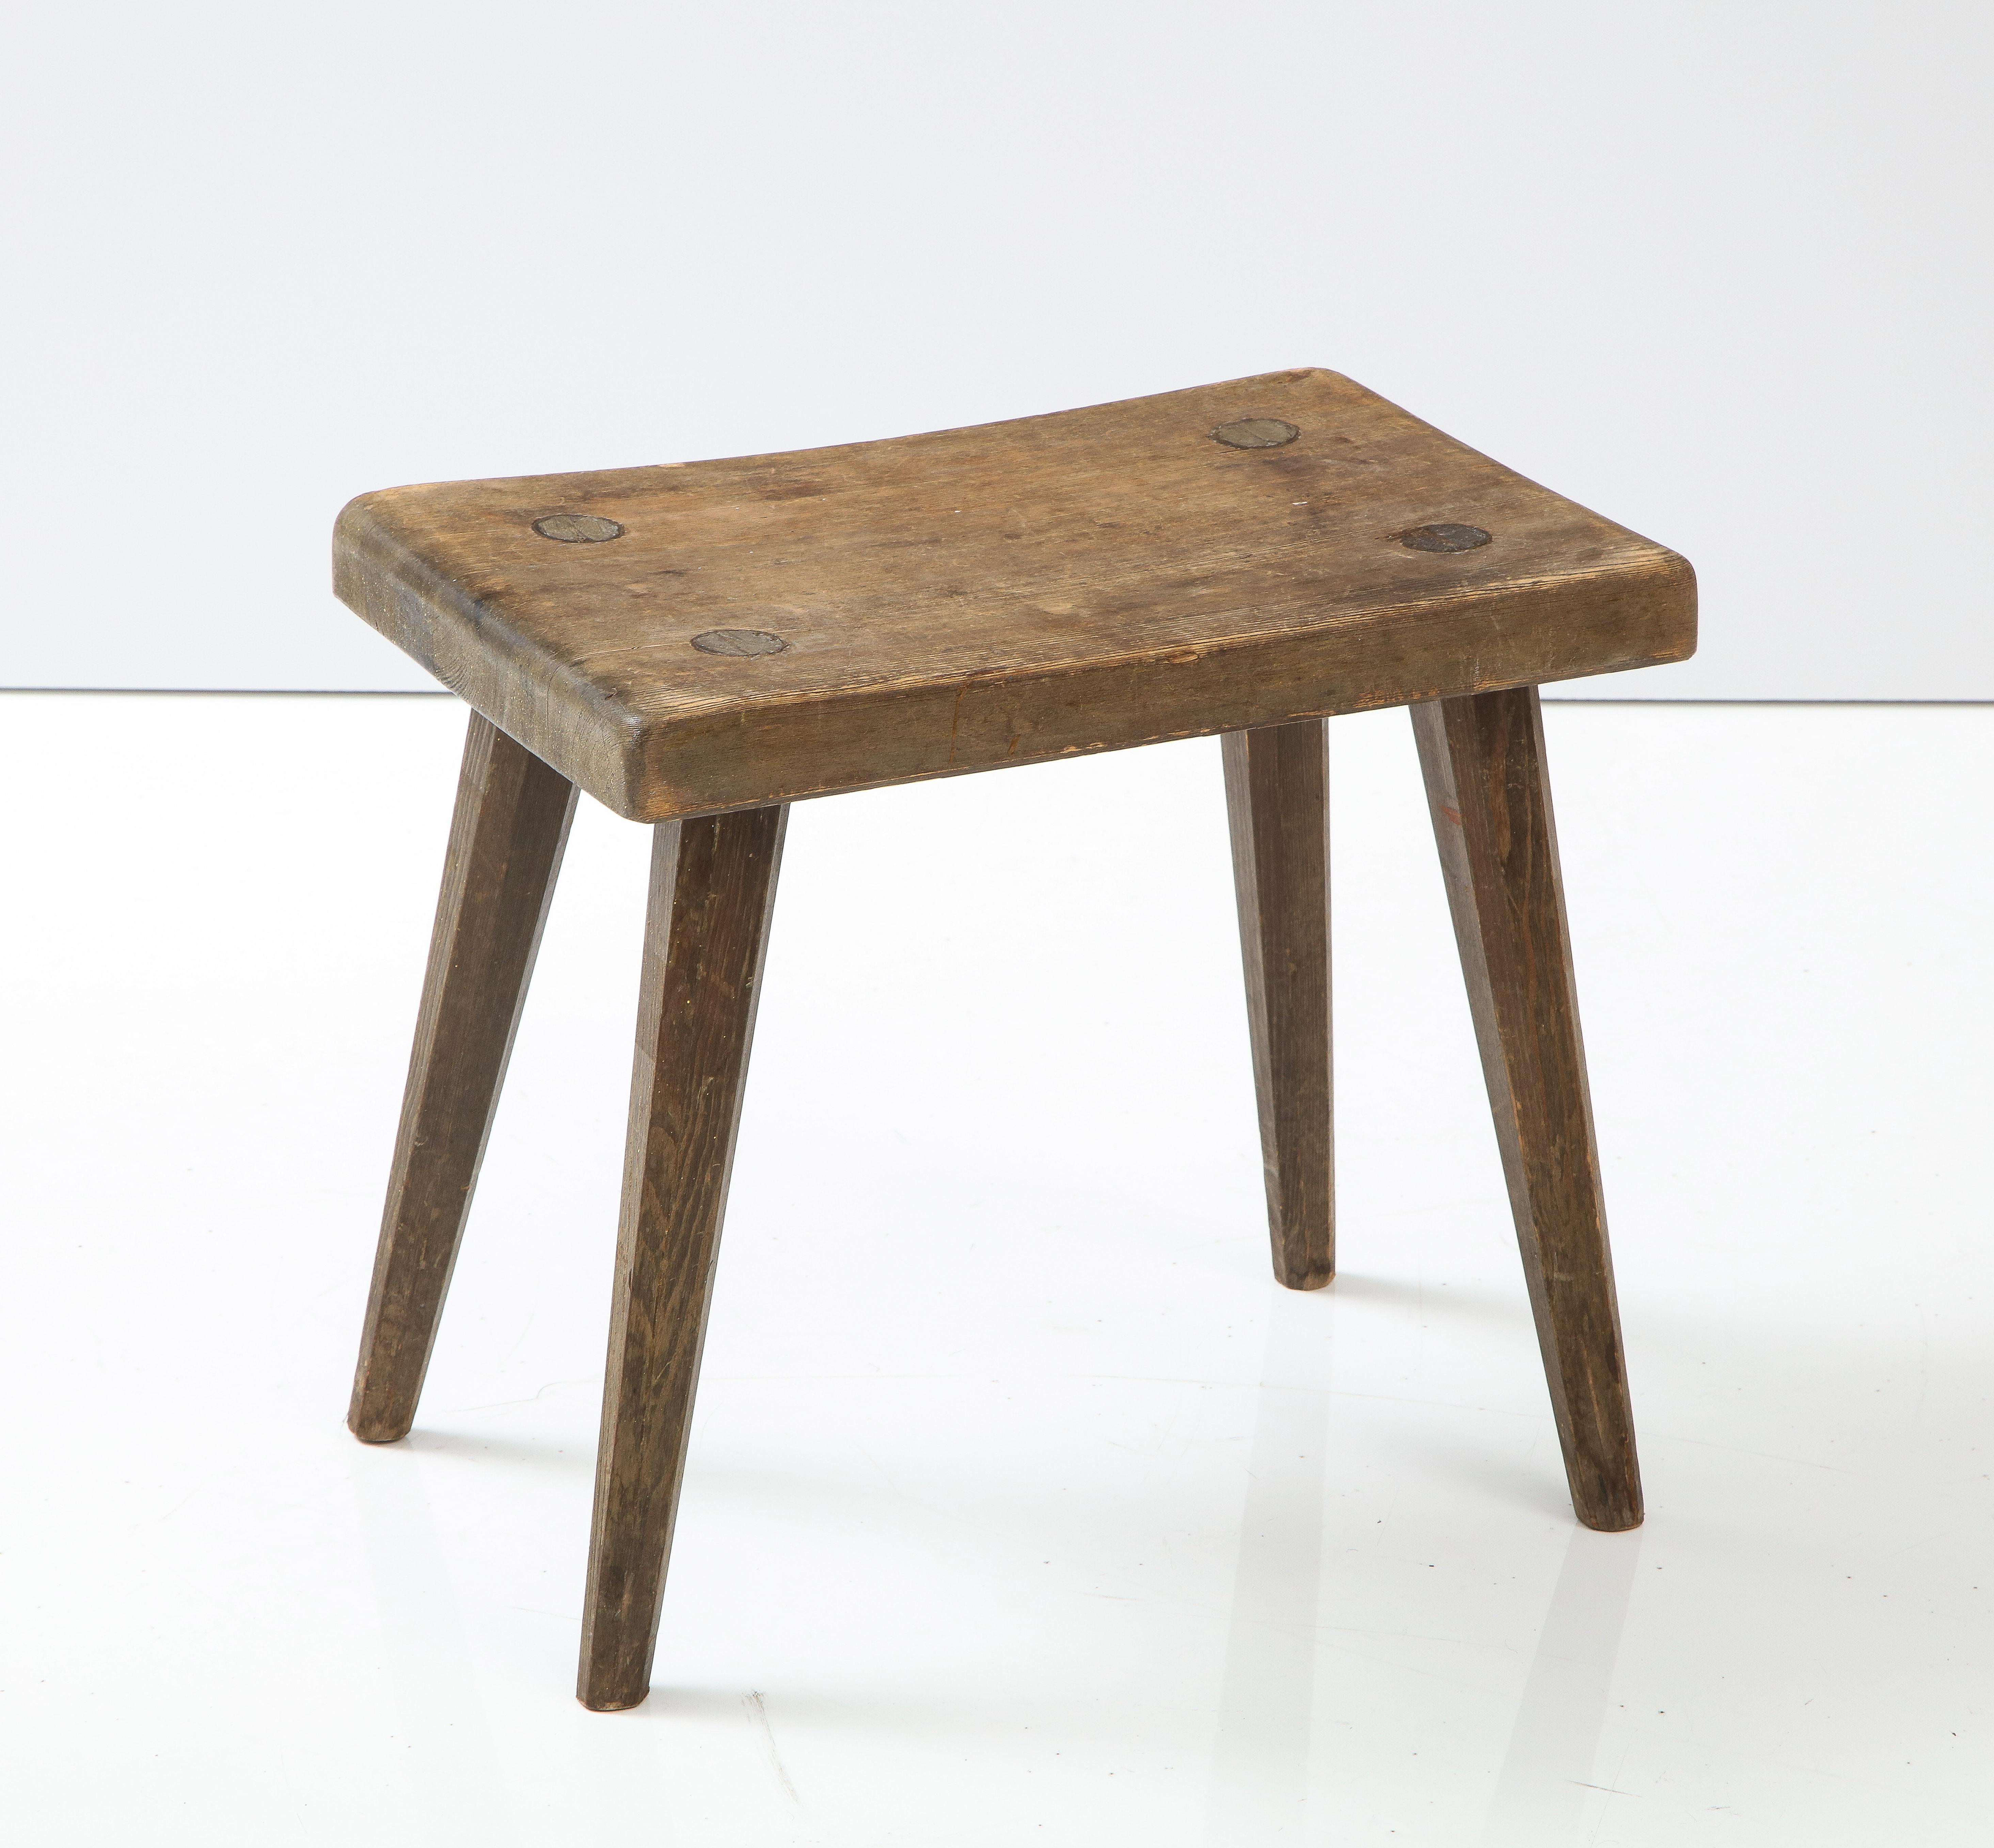 A Swedish solid pine stool with an original finish, Circa 1940s, nice thick top raised on square legs with canted edges.

